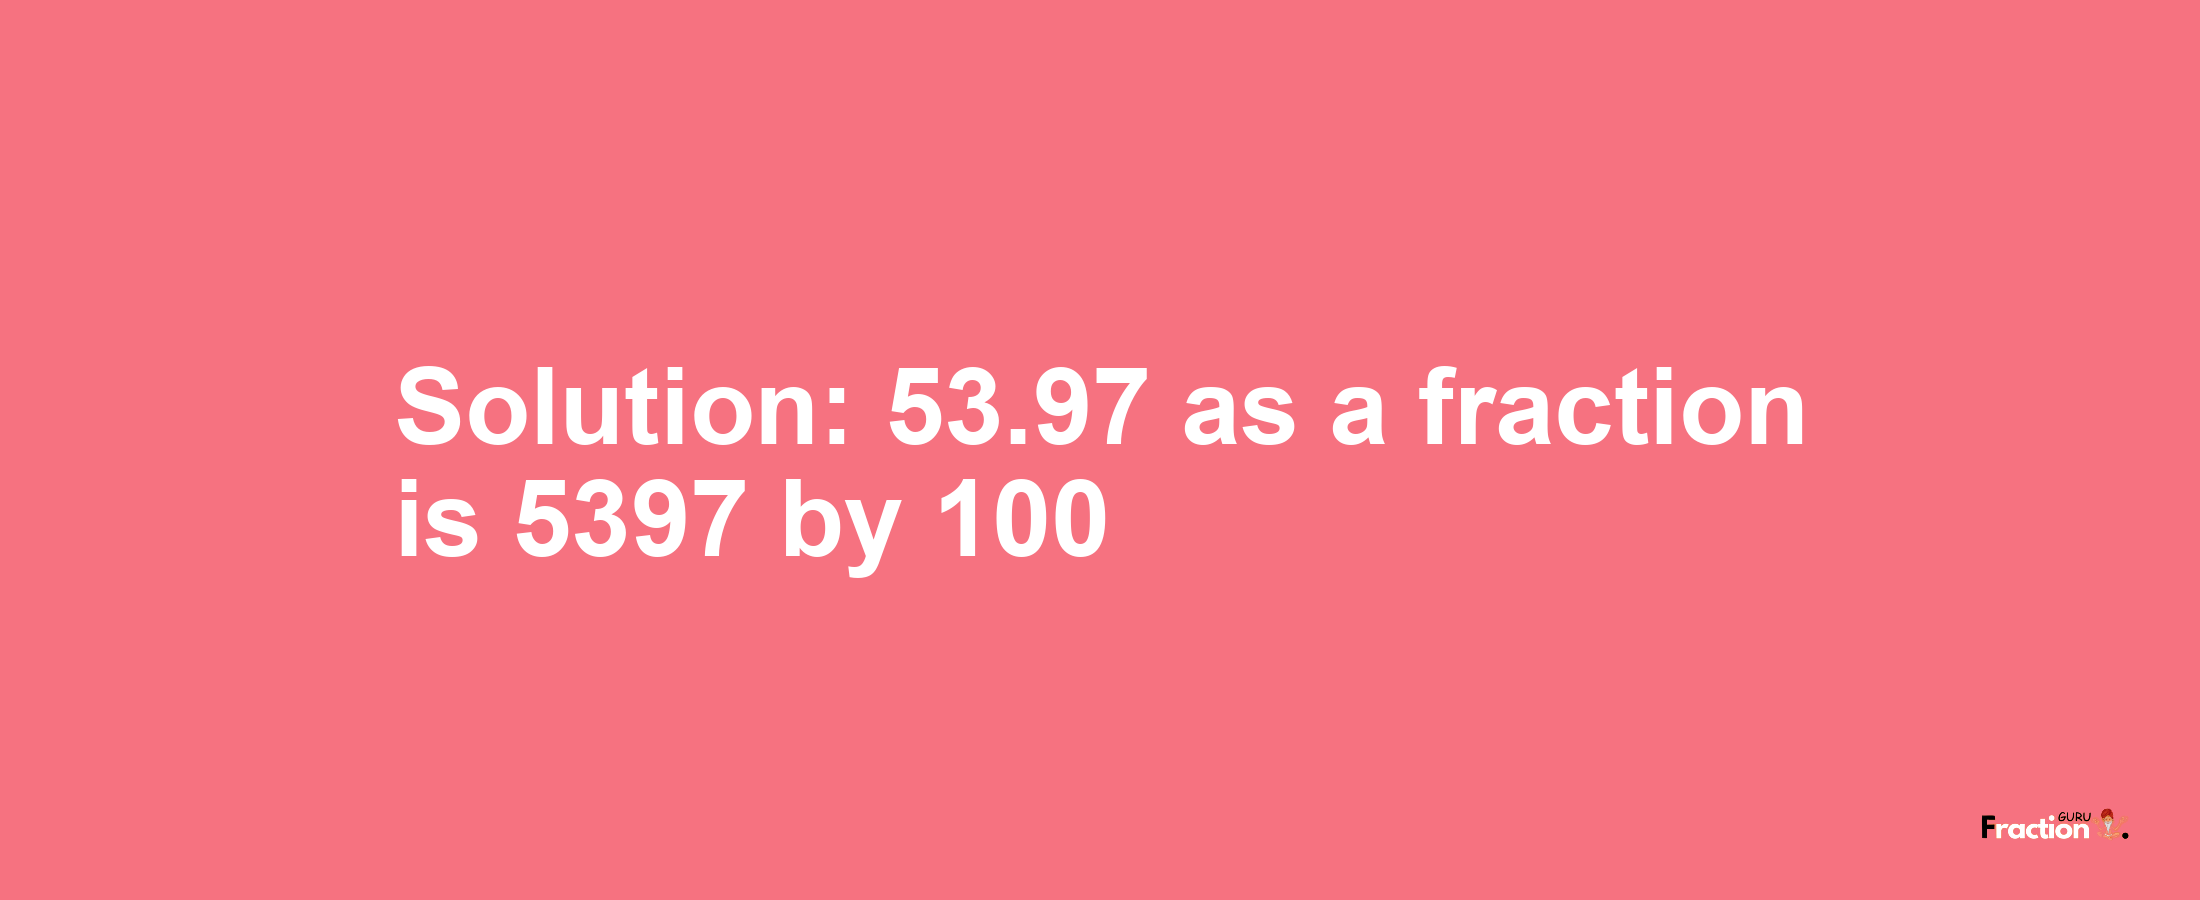 Solution:53.97 as a fraction is 5397/100